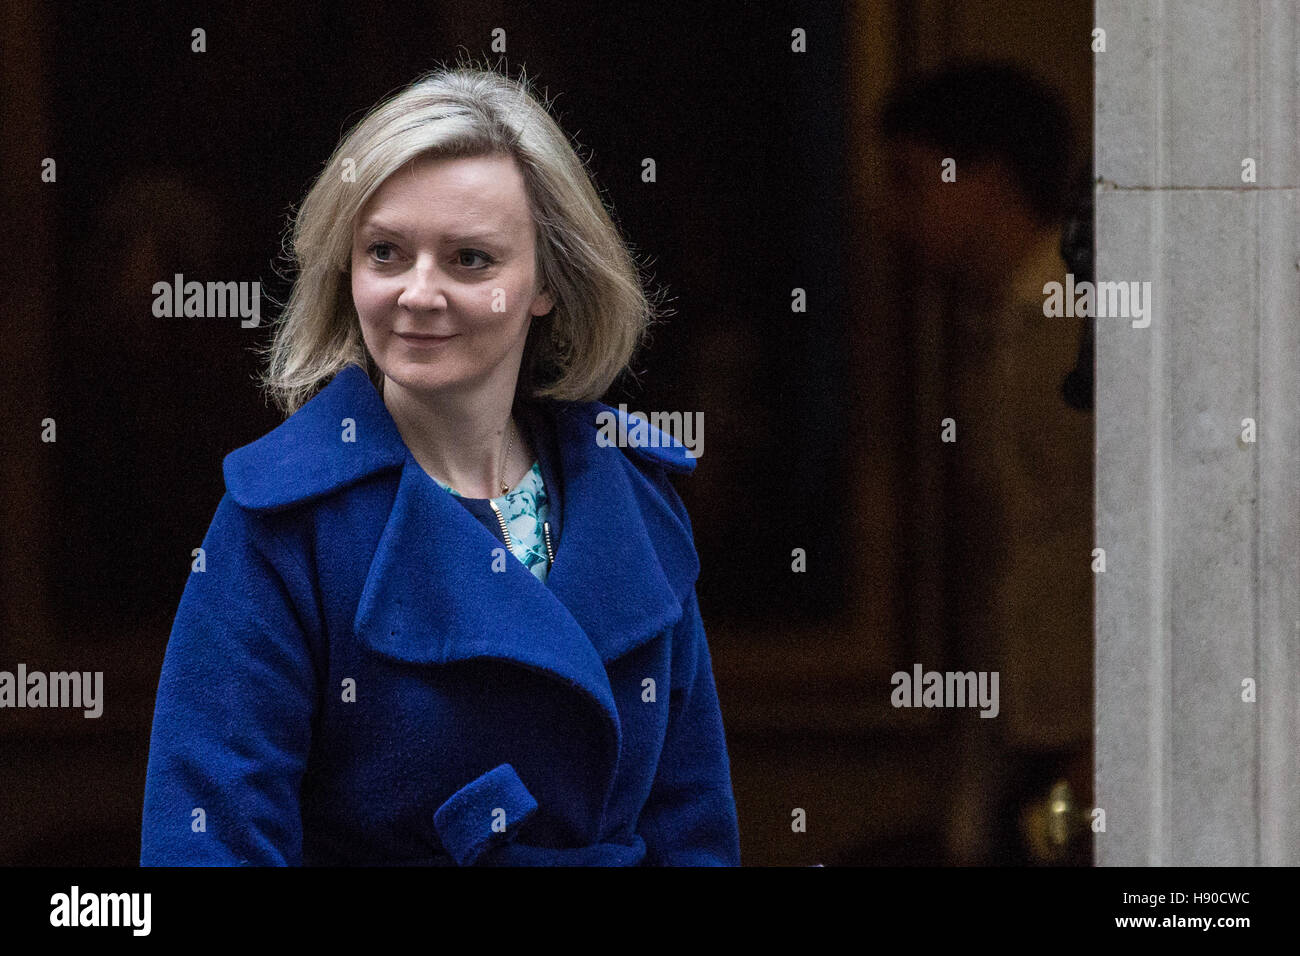 London, UK. 10th January, 2017. Elizabeth Truss MP, Lord Chancellor and Secretary of State for Justice, leaves 10 Downing Street following a Cabinet meeting. Credit: Mark Kerrison/Alamy Live News Stock Photo